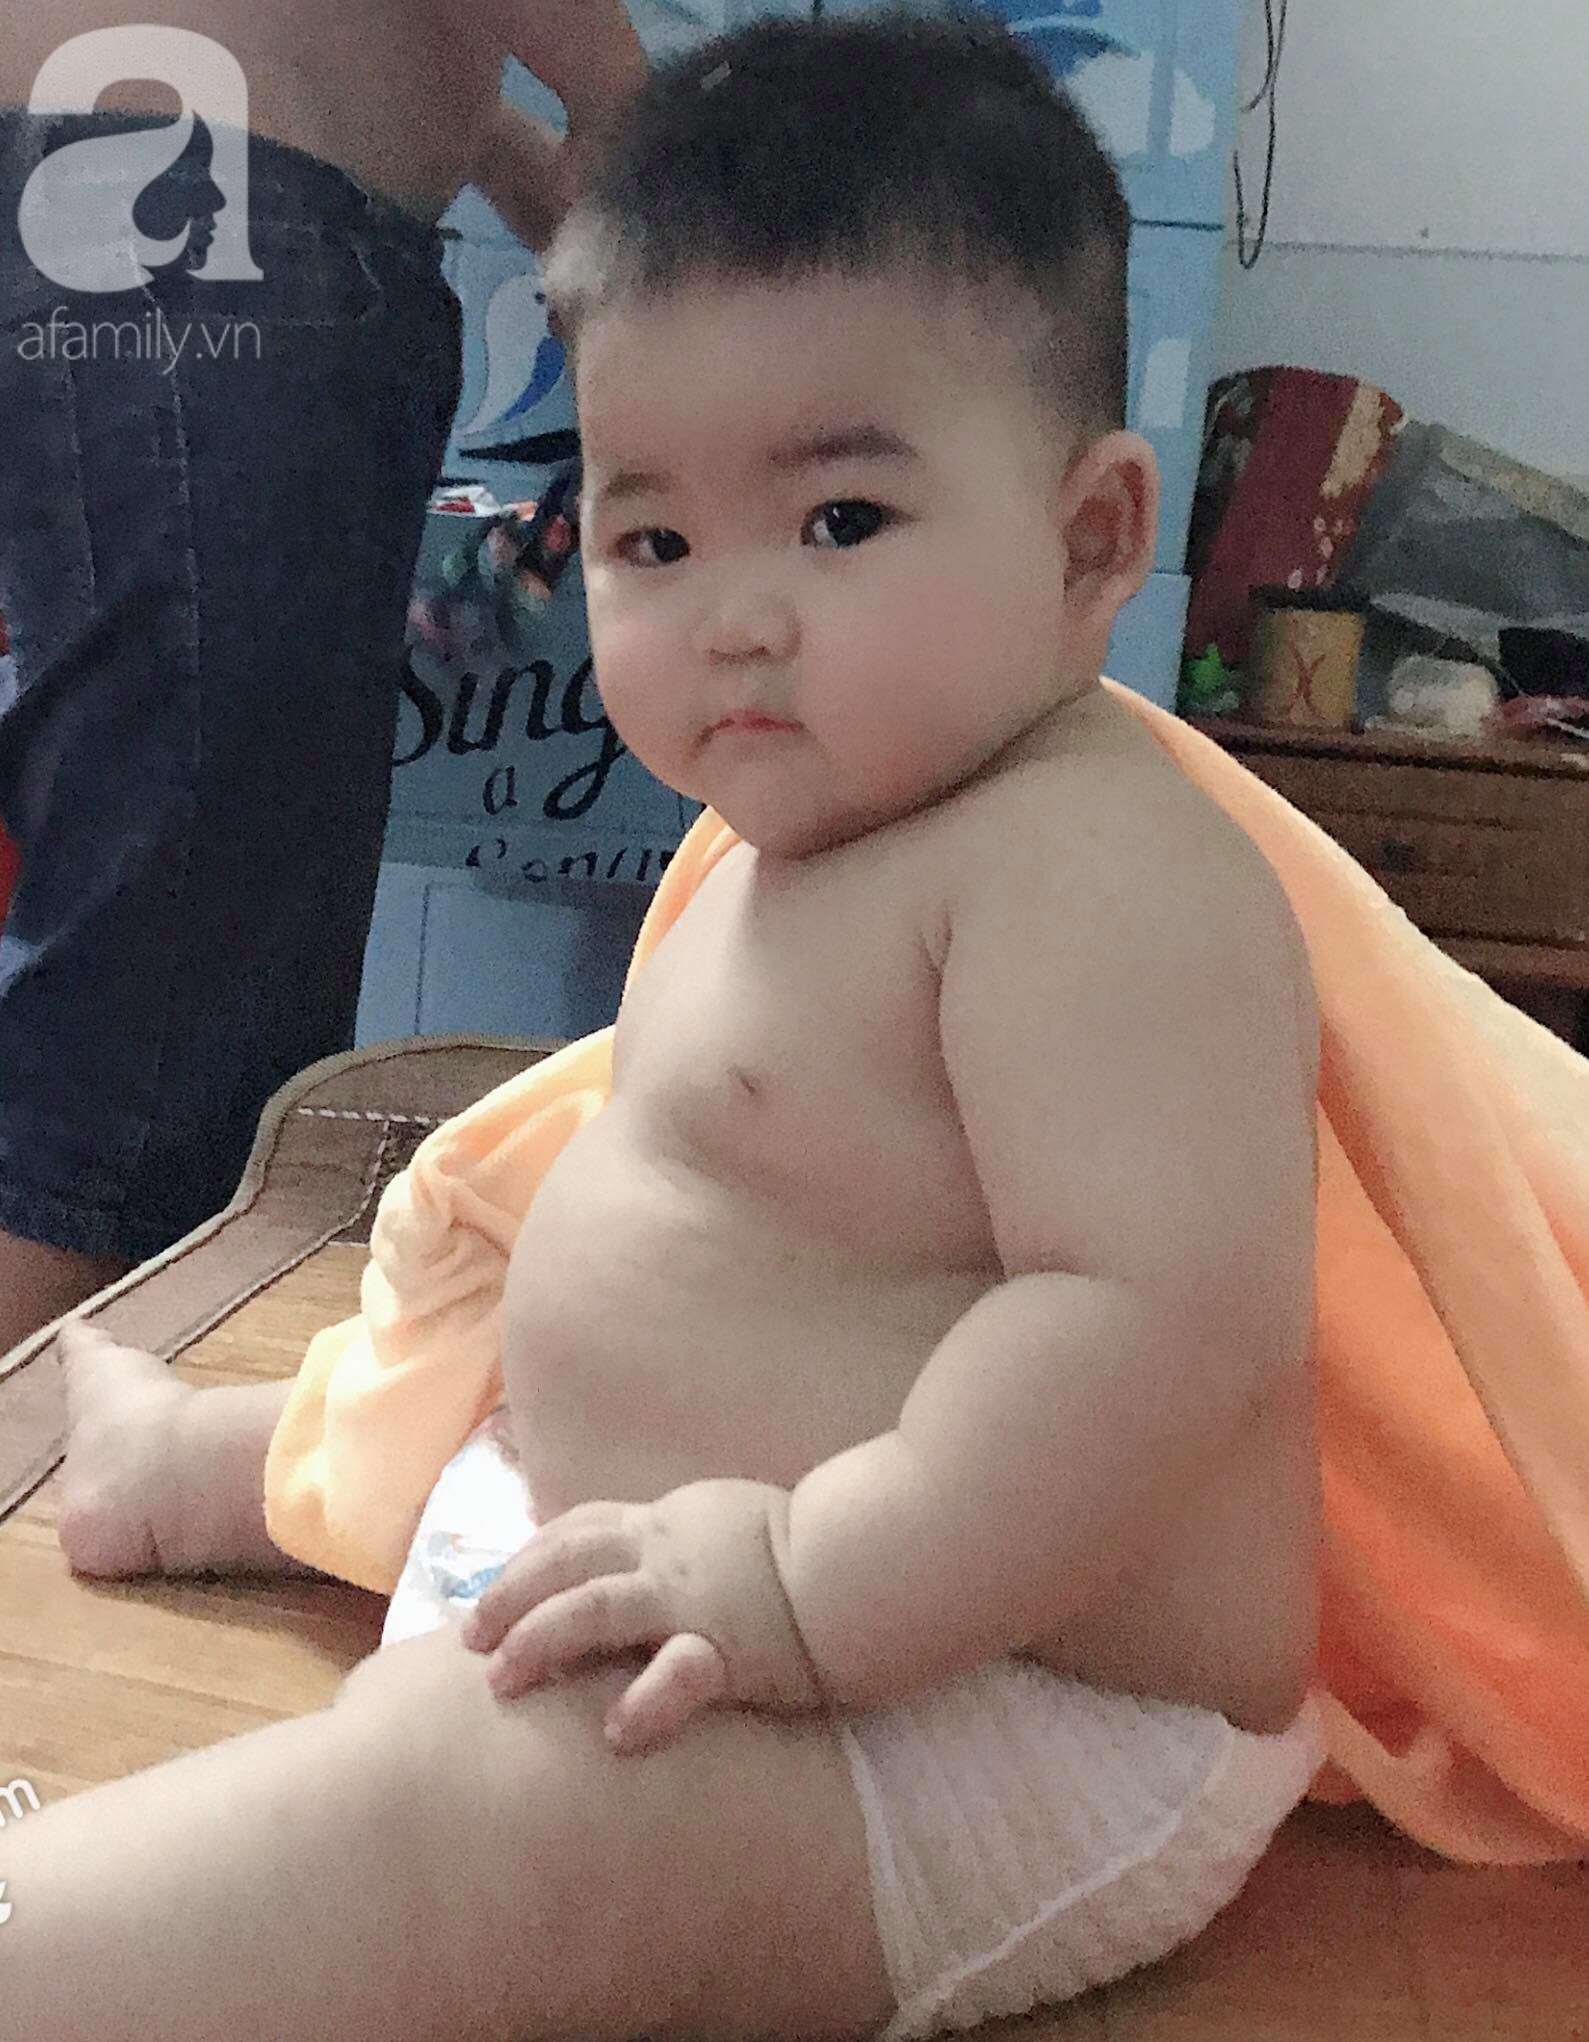 Cute fat babies are everyone's favorite. With their carefree and adorable nature, these babies will make you feel relaxed and happy. Let's take a look at the beautiful images of these little angels.